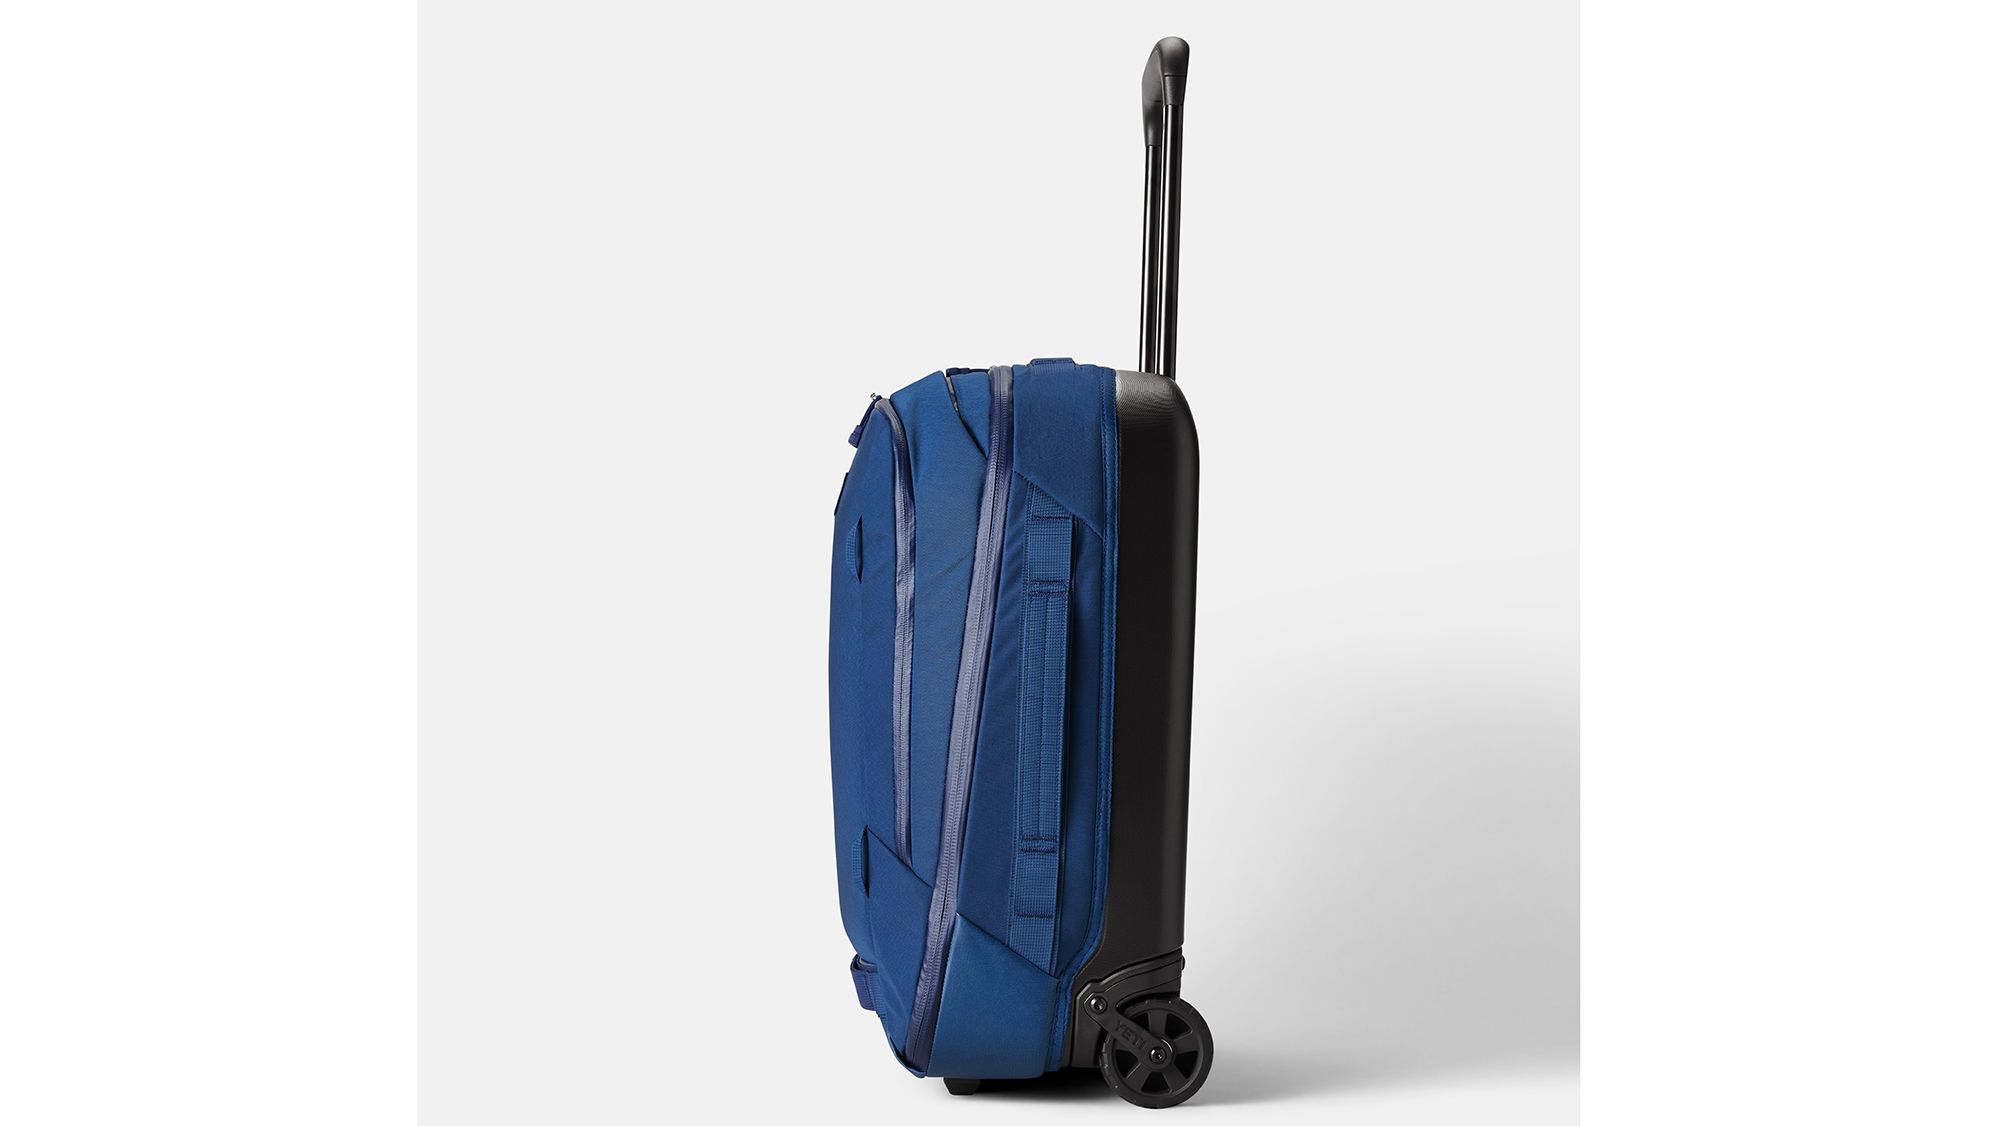 YETI Crossroads Luggage Review: An Over-Organized System for